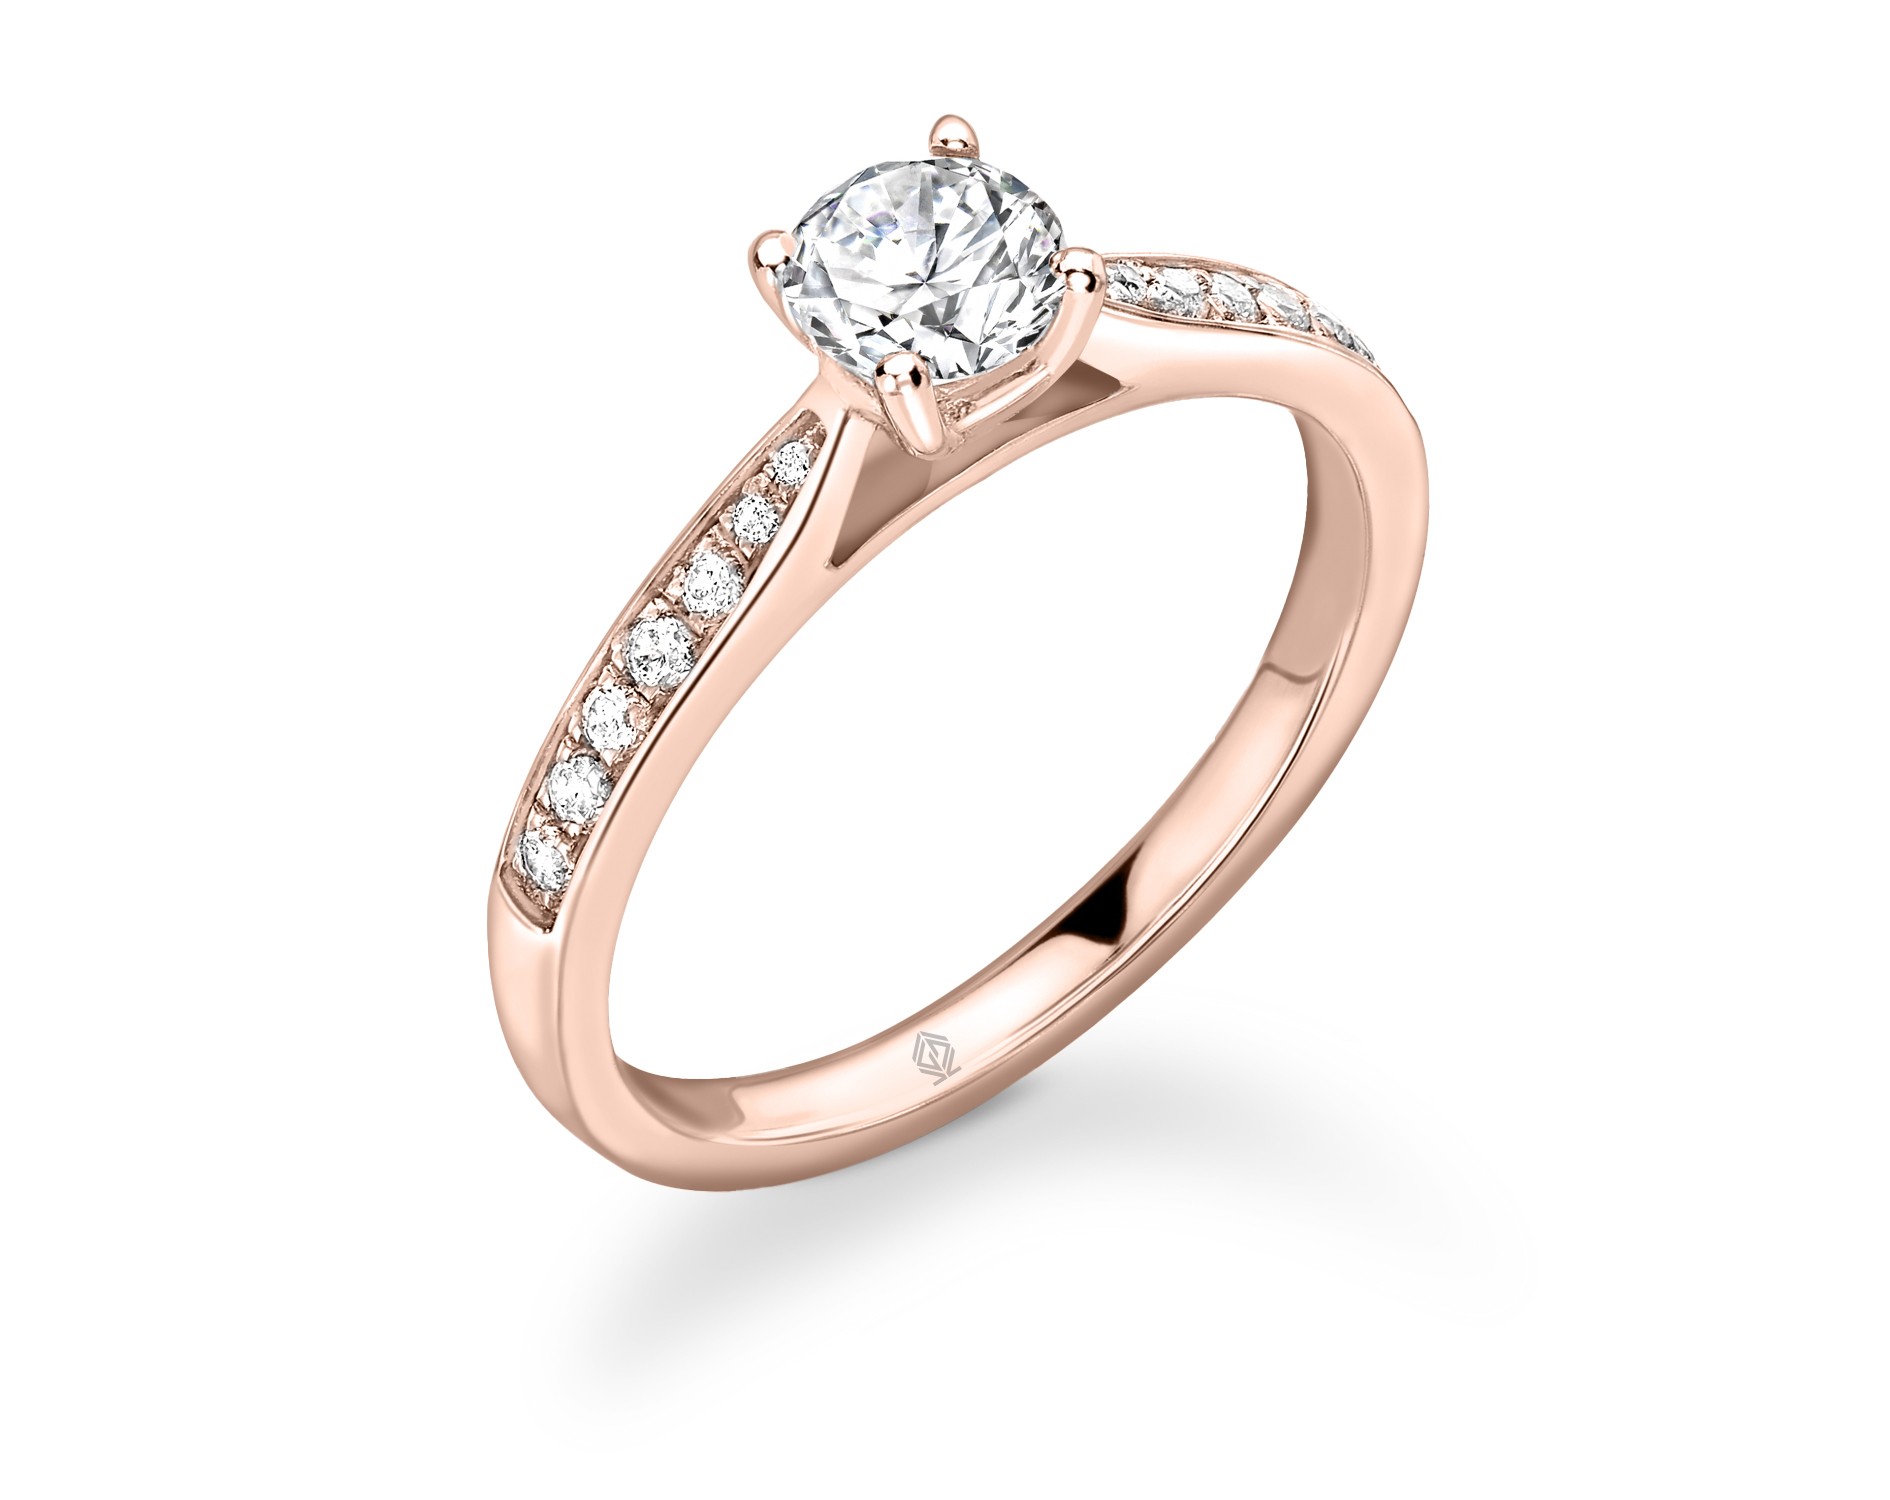 18K ROSE GOLD ROUND CUT 4 PRONGS DIAMOND ENGAGEMENT RING SIDE STONES WITH CHANNEL SET